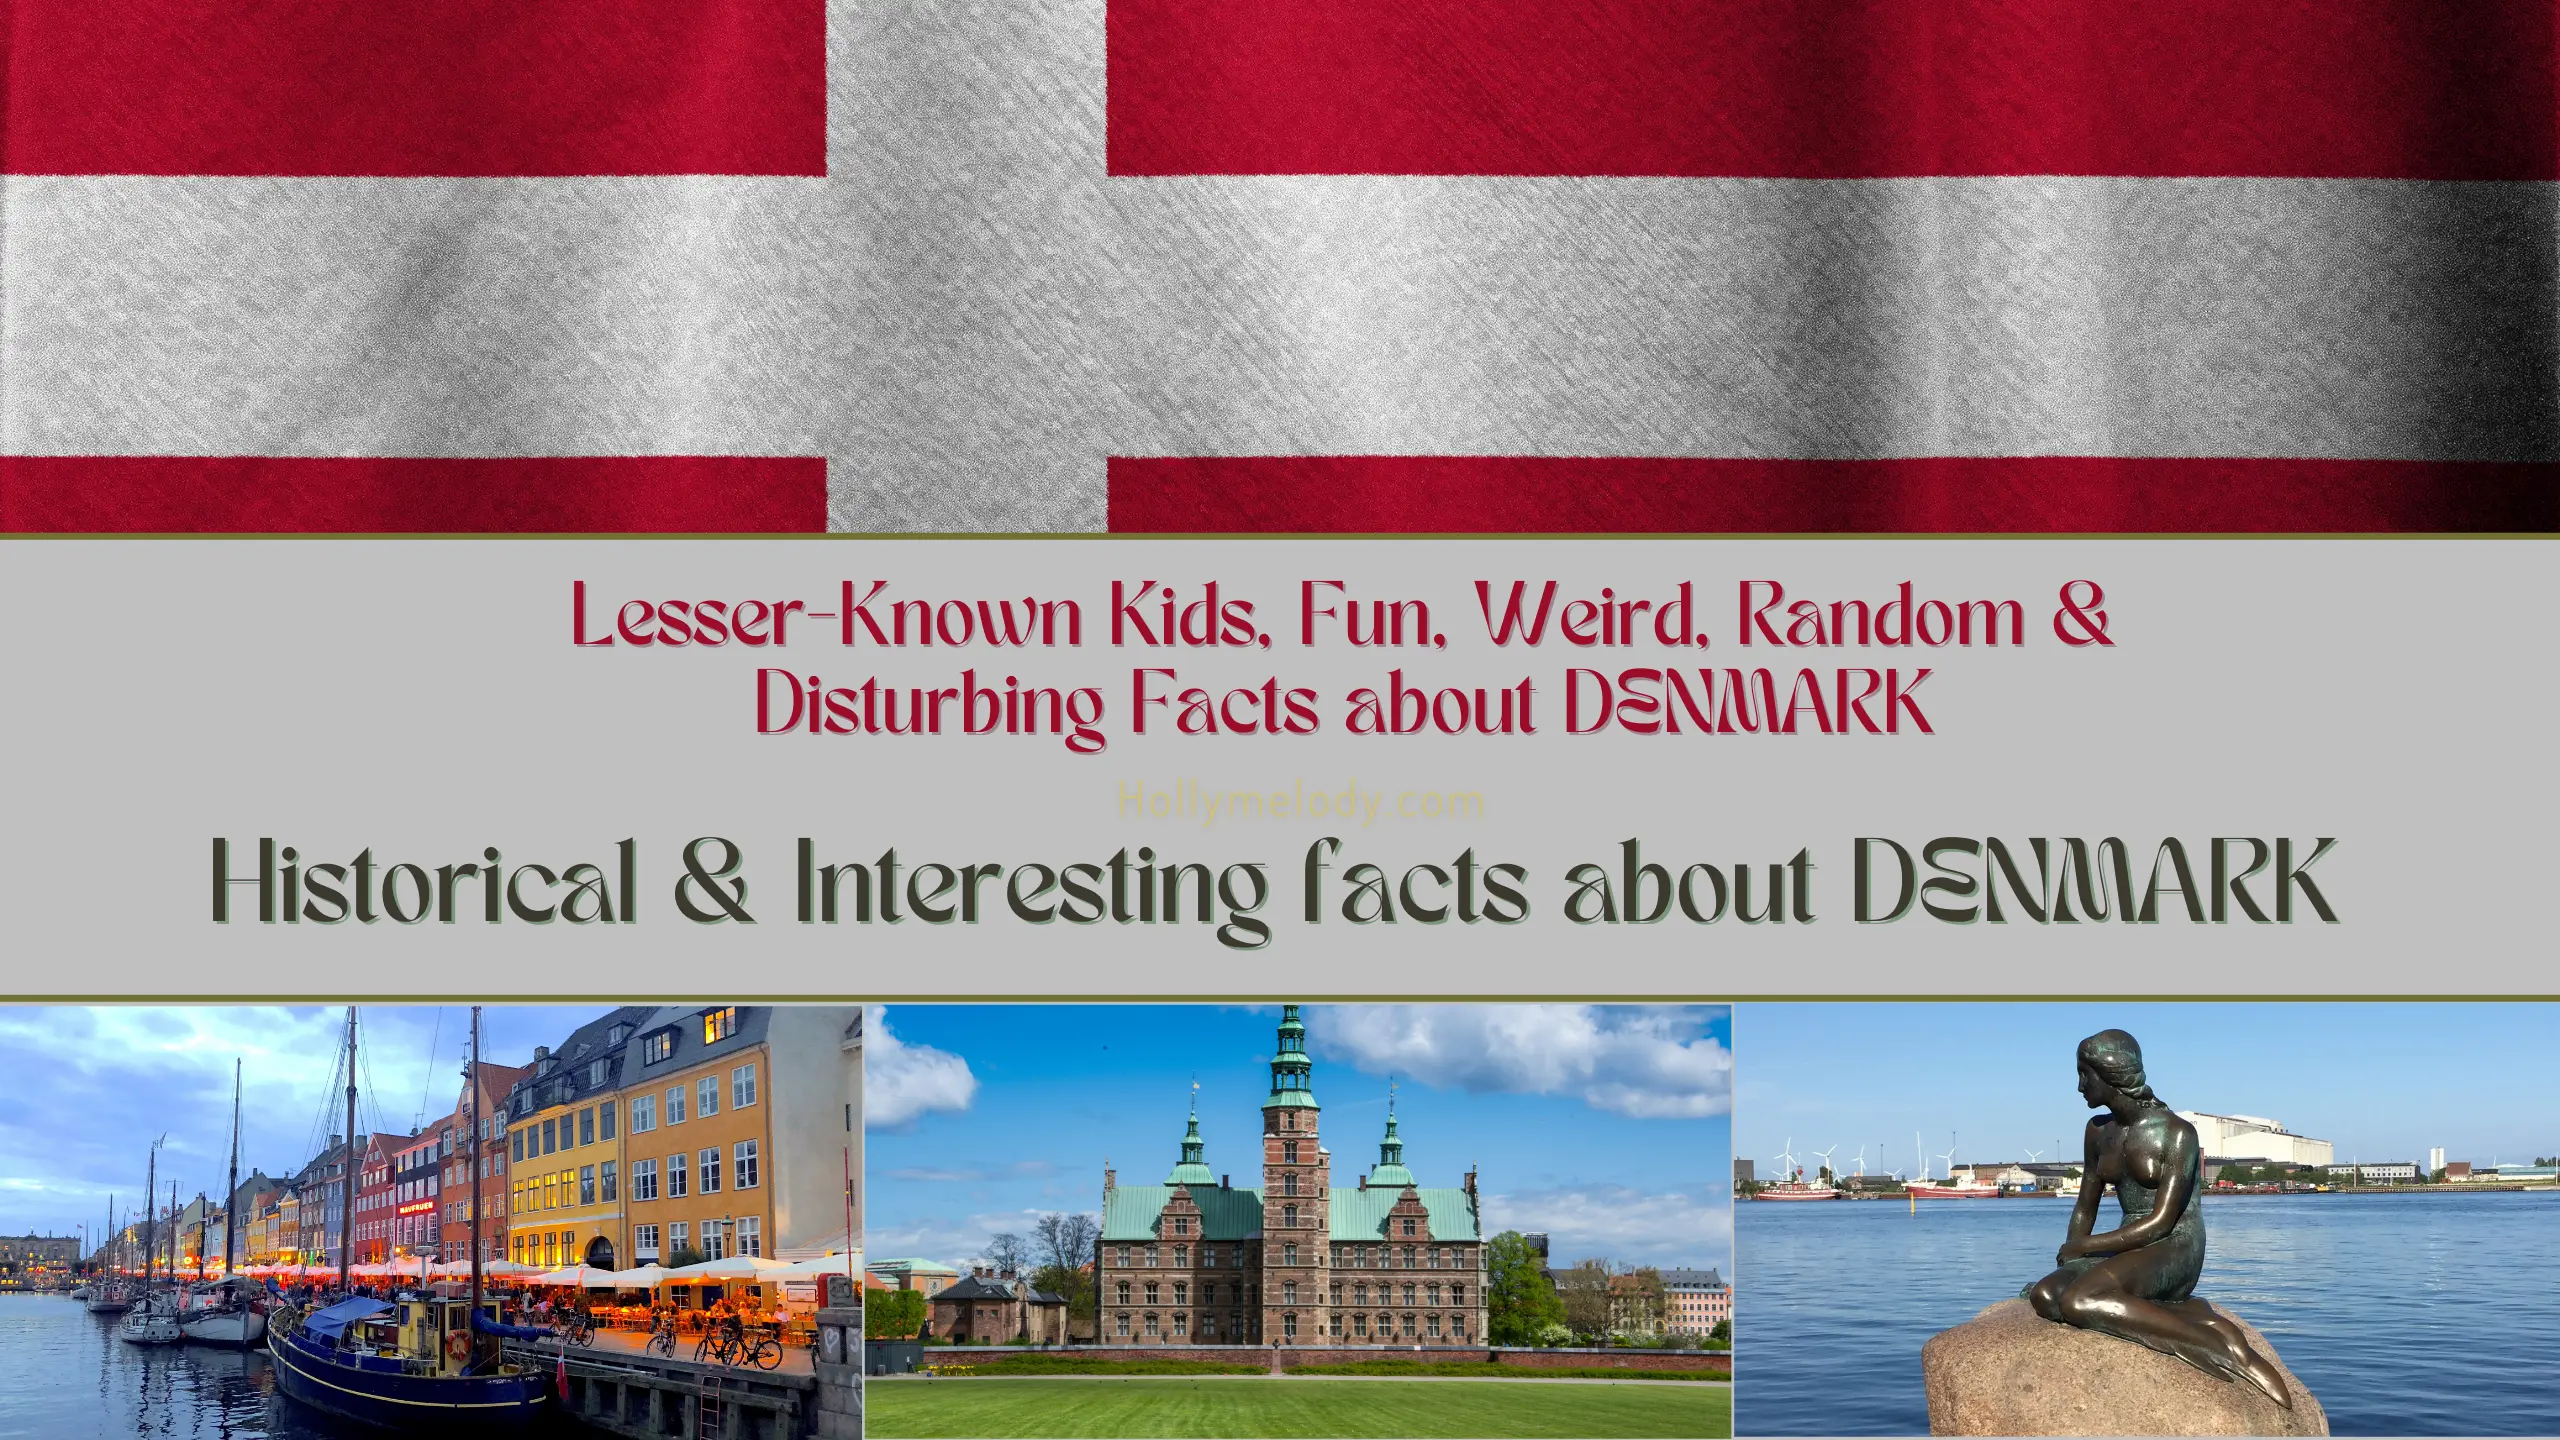 Historical & Interesting facts about DENMARK